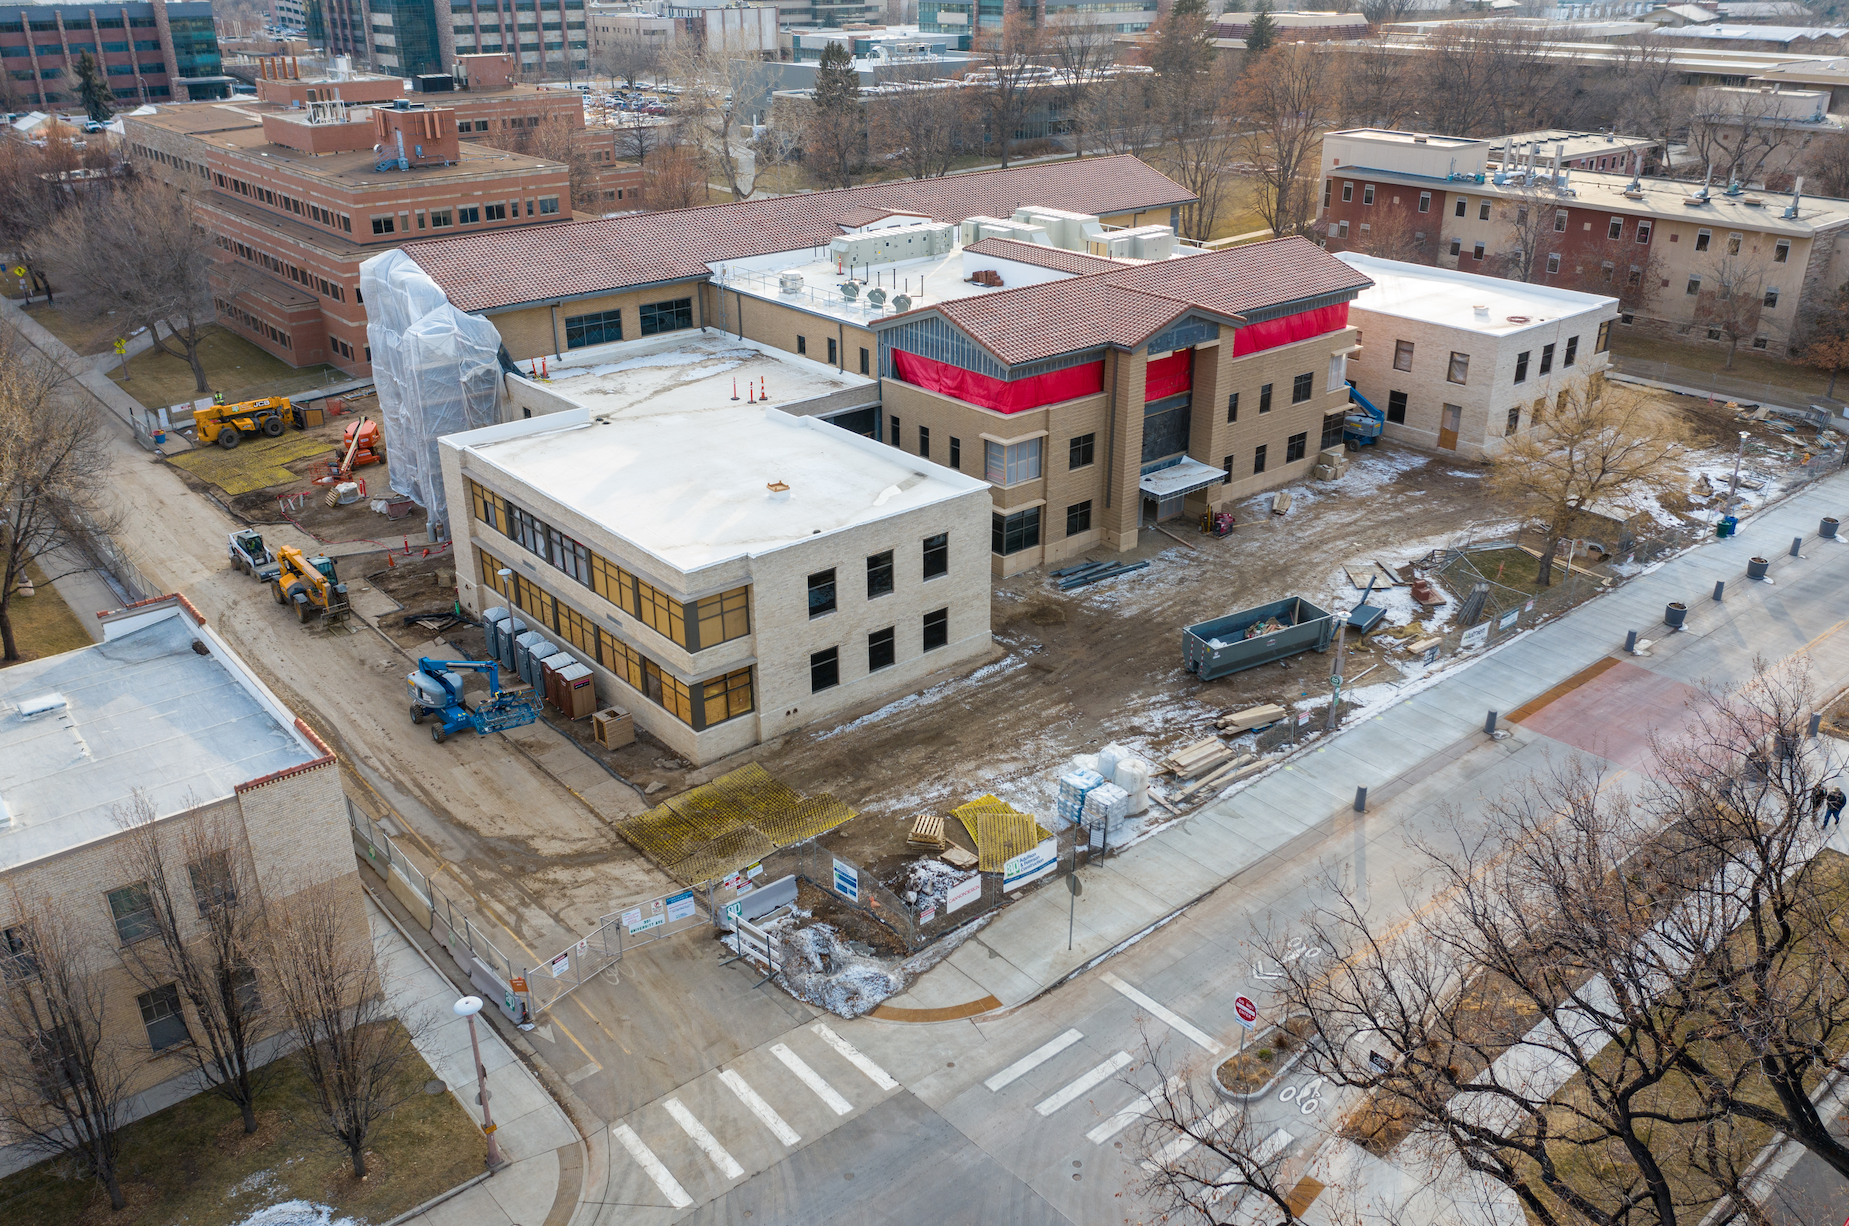 Aerial photograph of a building under construction on a winter day.